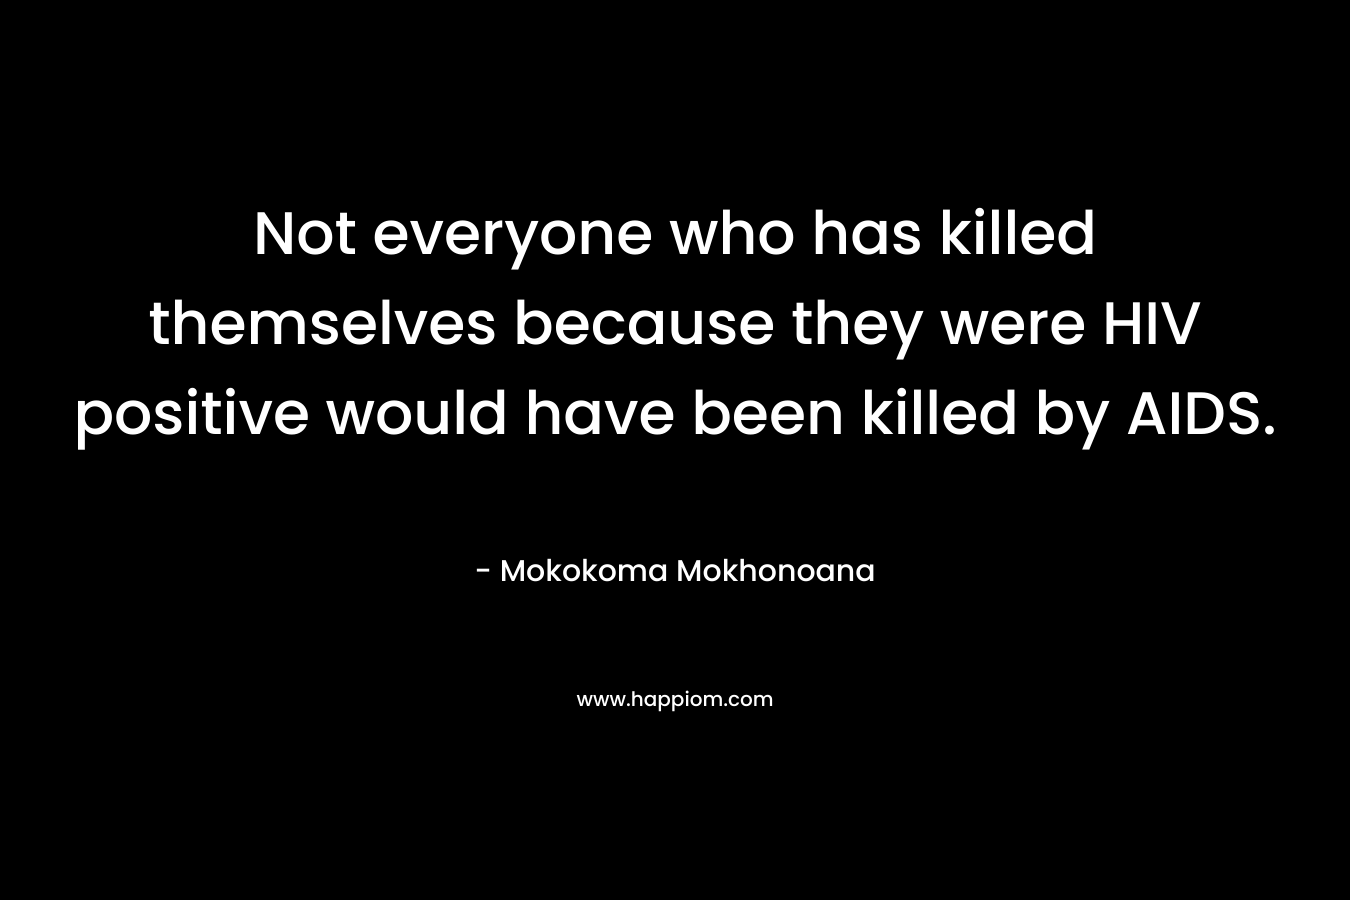 Not everyone who has killed themselves because they were HIV positive would have been killed by AIDS.